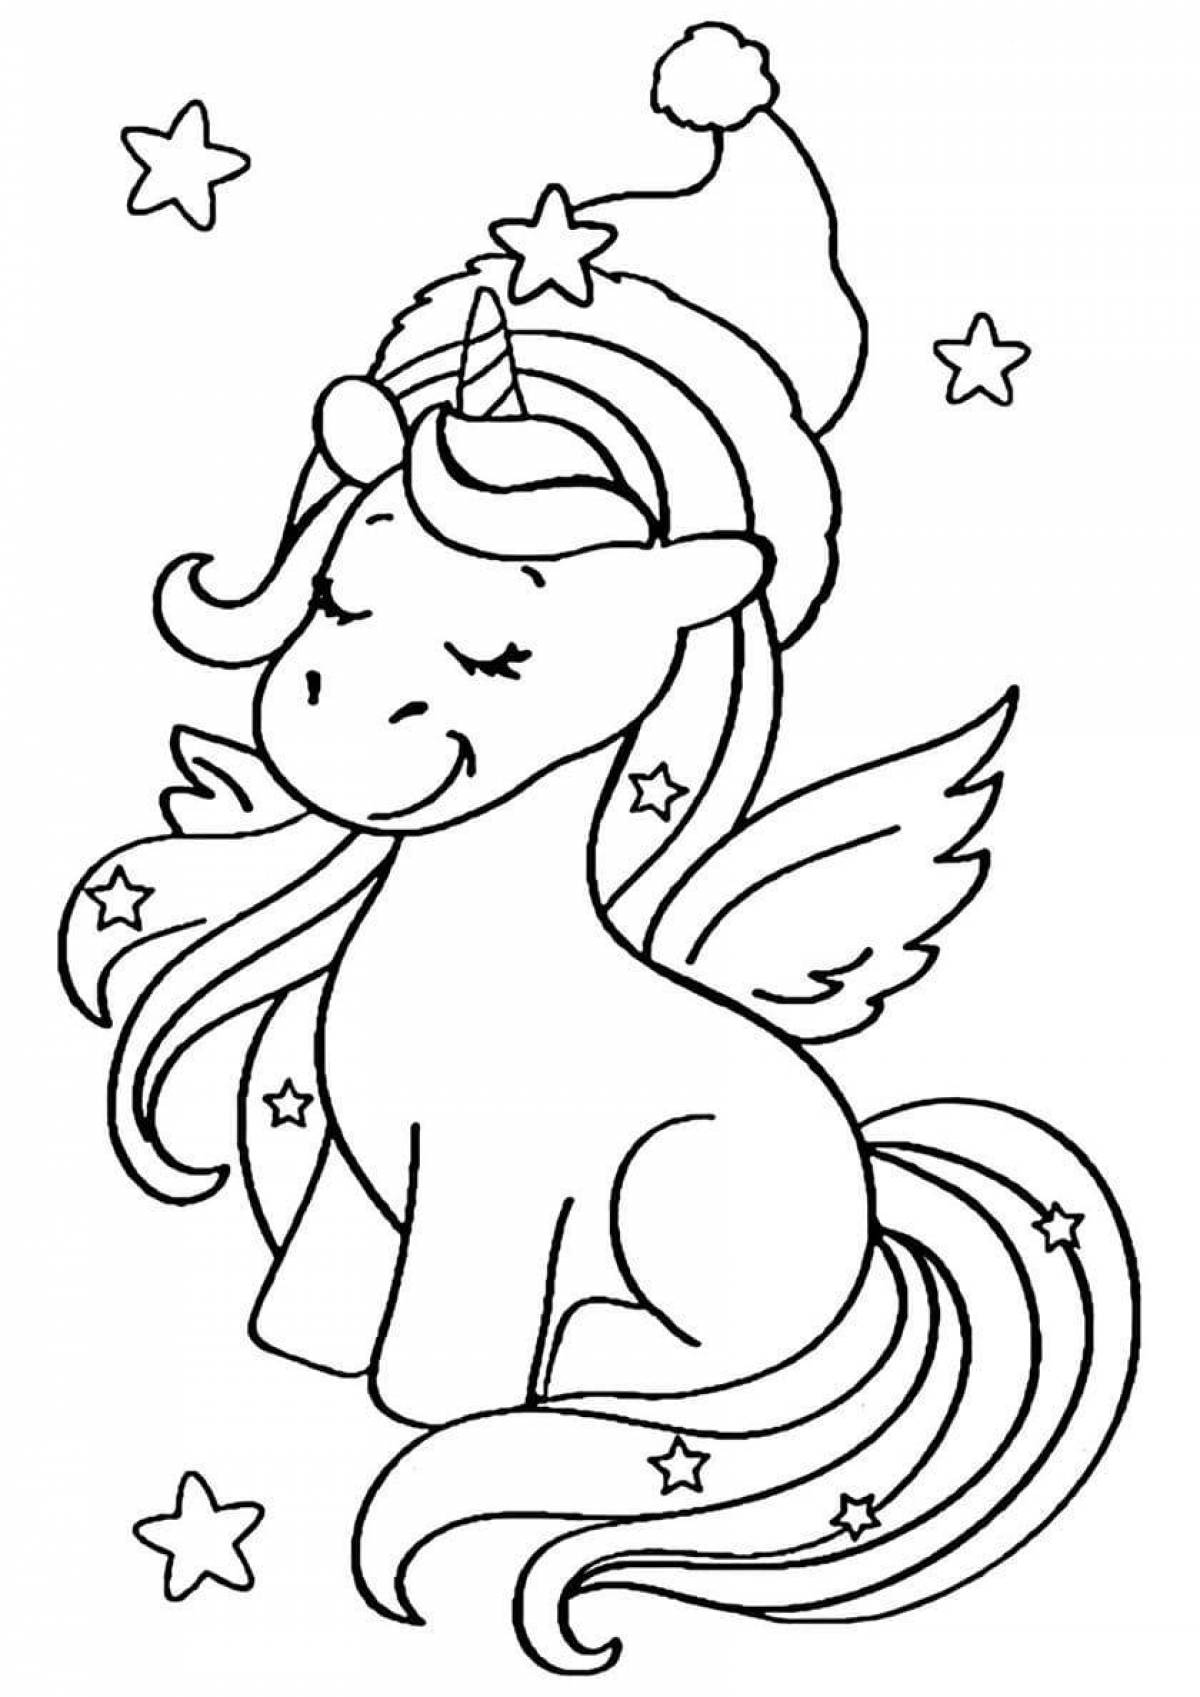 Fancy unicorn coloring book for kids 3-4 years old